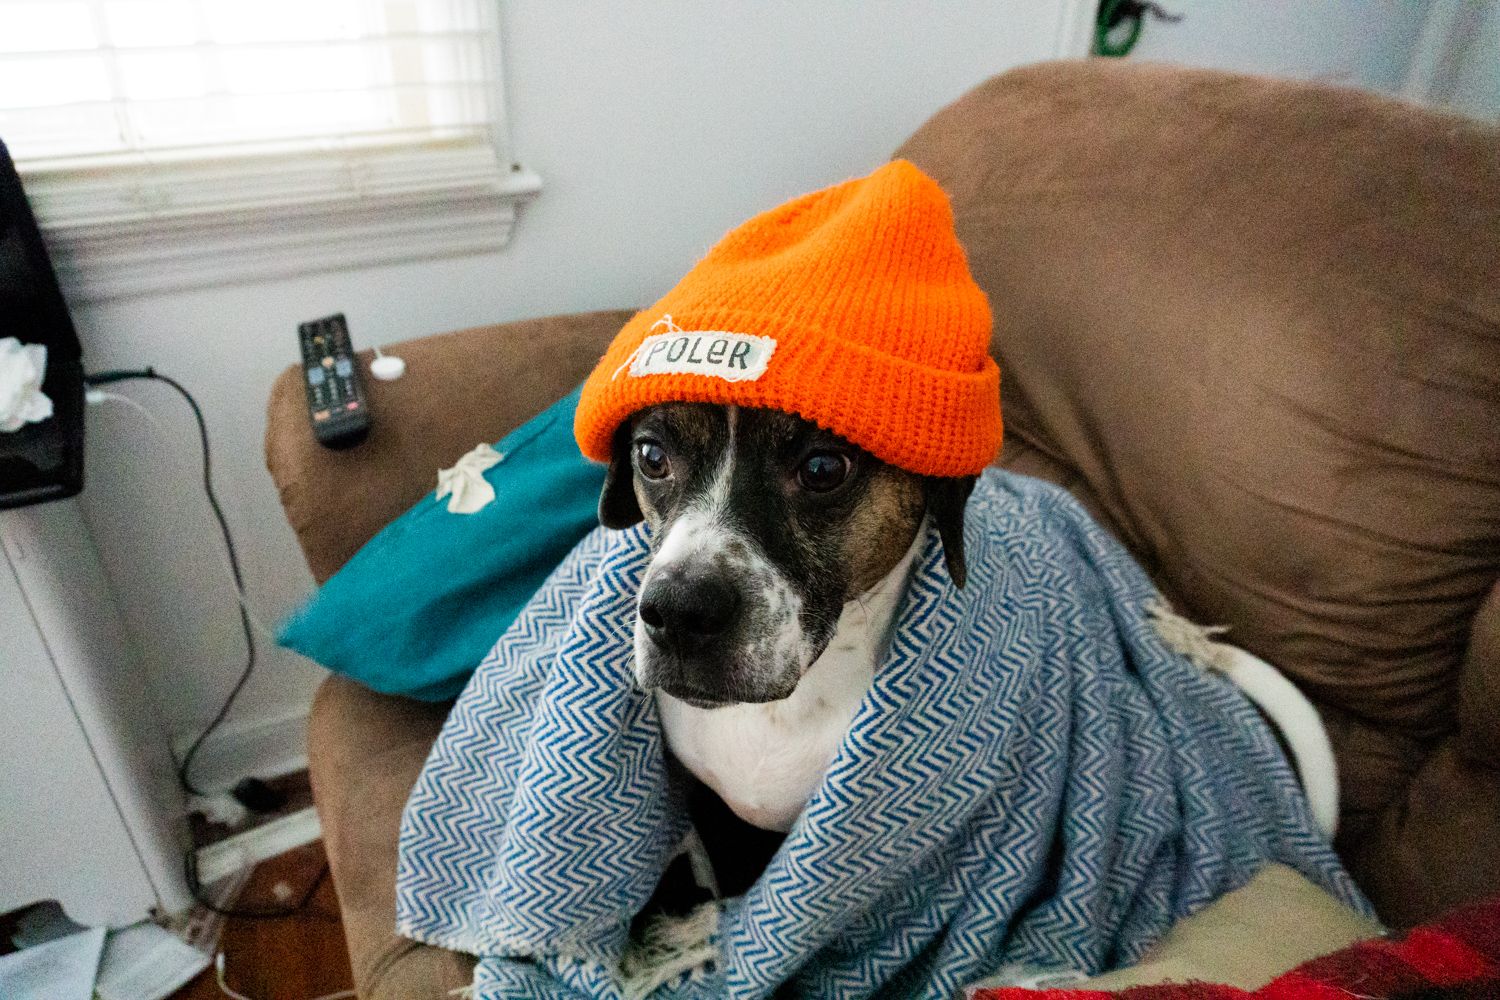 Rocky staying warm in his Poler beanie